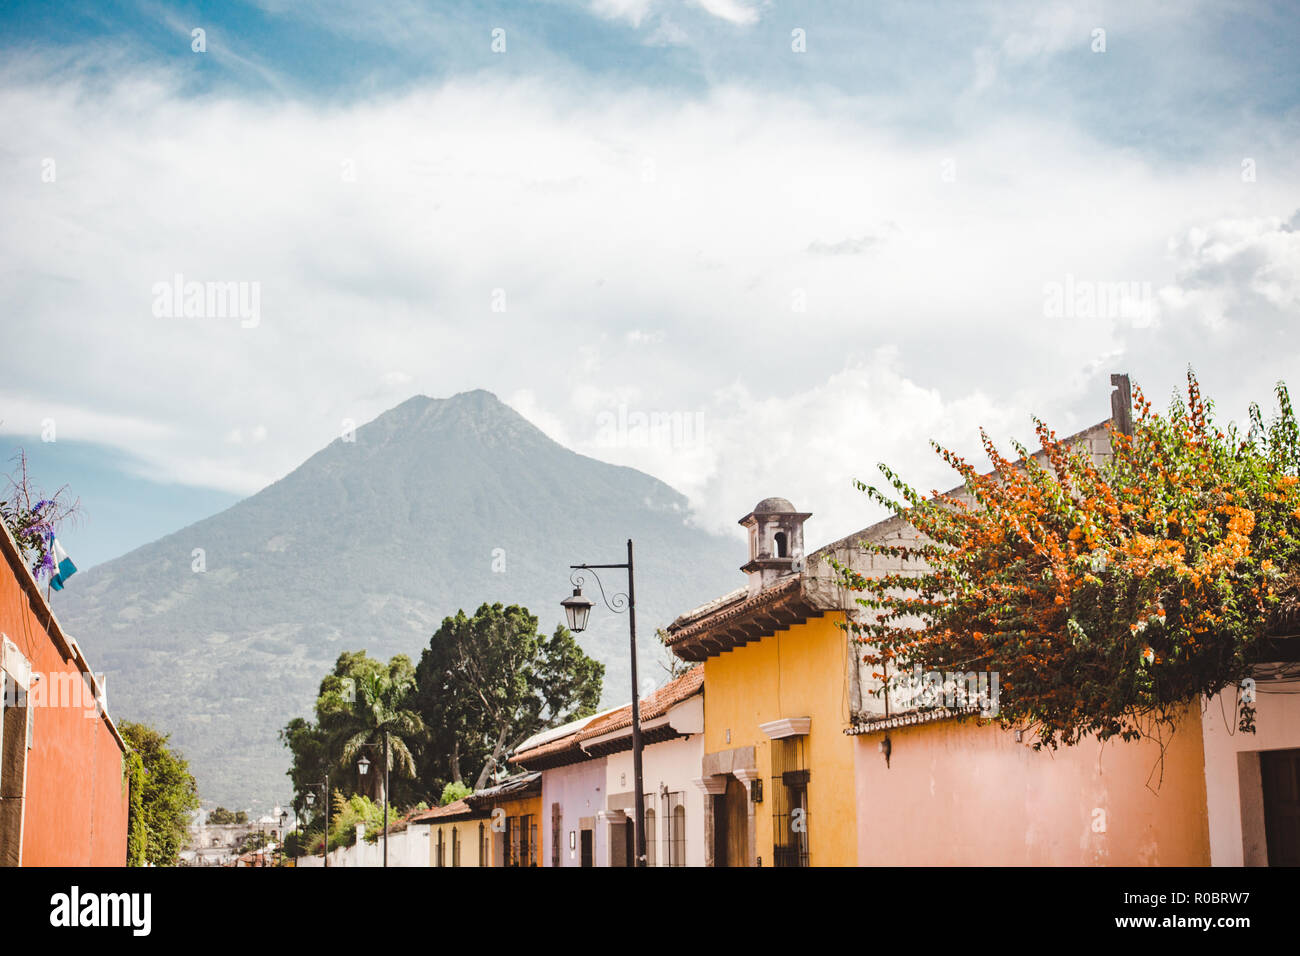 Colorful streets of Antigua Guatemala lead towards the Volcan de Agua Volcano on a summer's day Stock Photo